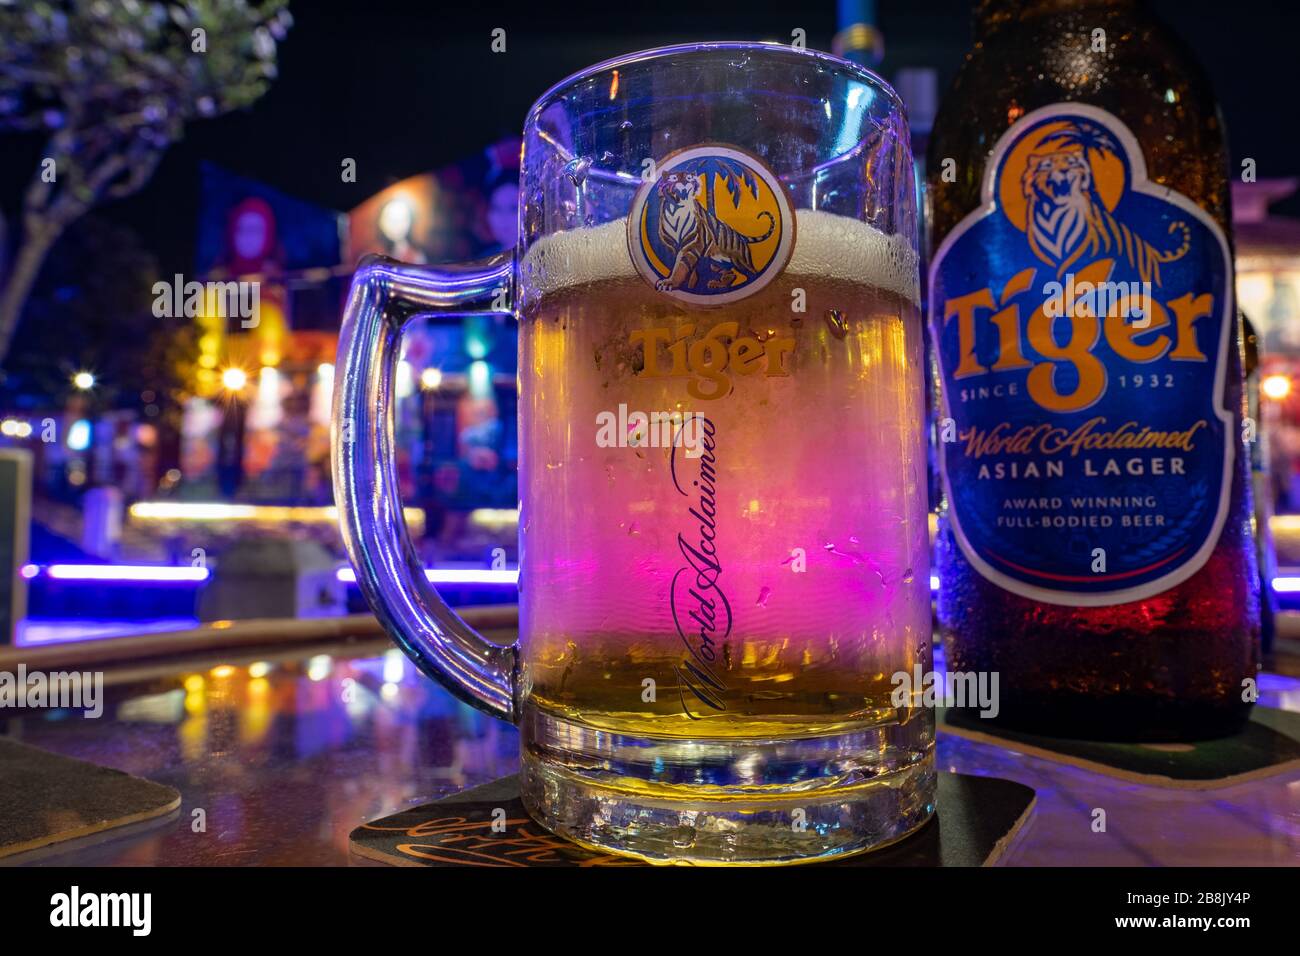 A cold glass and bottle of Tiger Beer, a lager beer made in Singapore Stock Photo